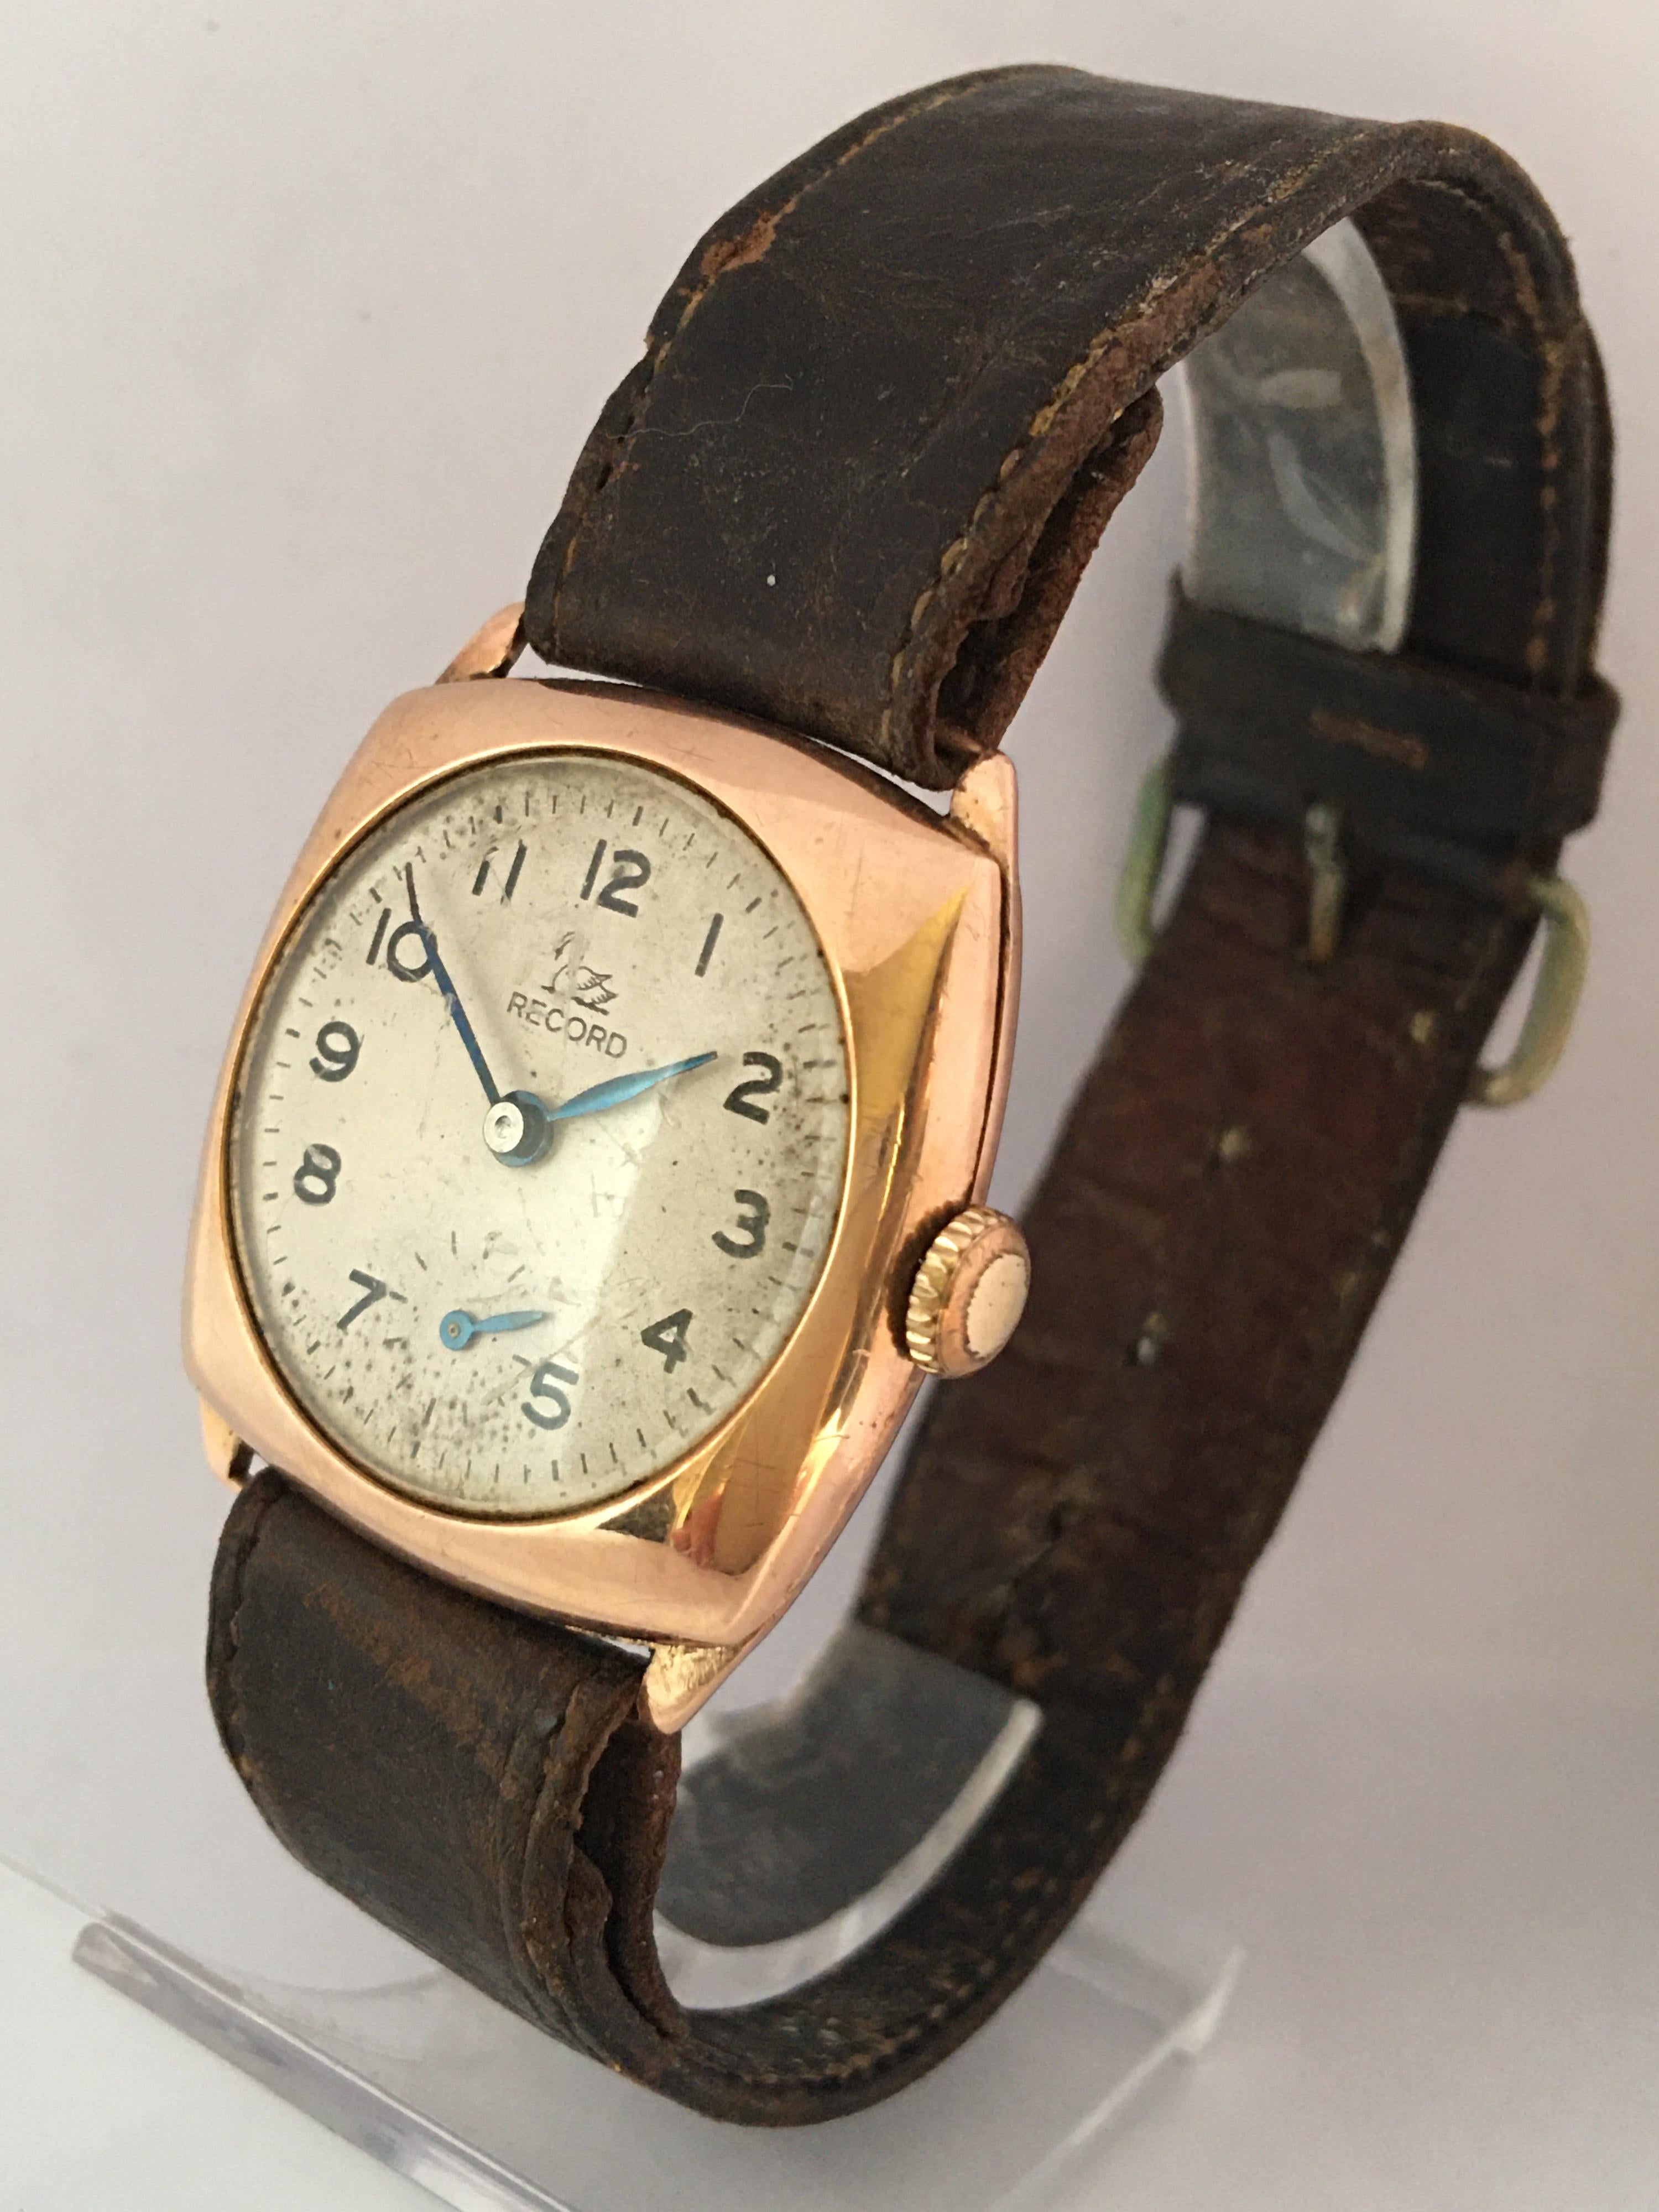 9 Karat Gold Vintage 1950s Récord Cushion Shaped Mechanical Watch For Sale 2